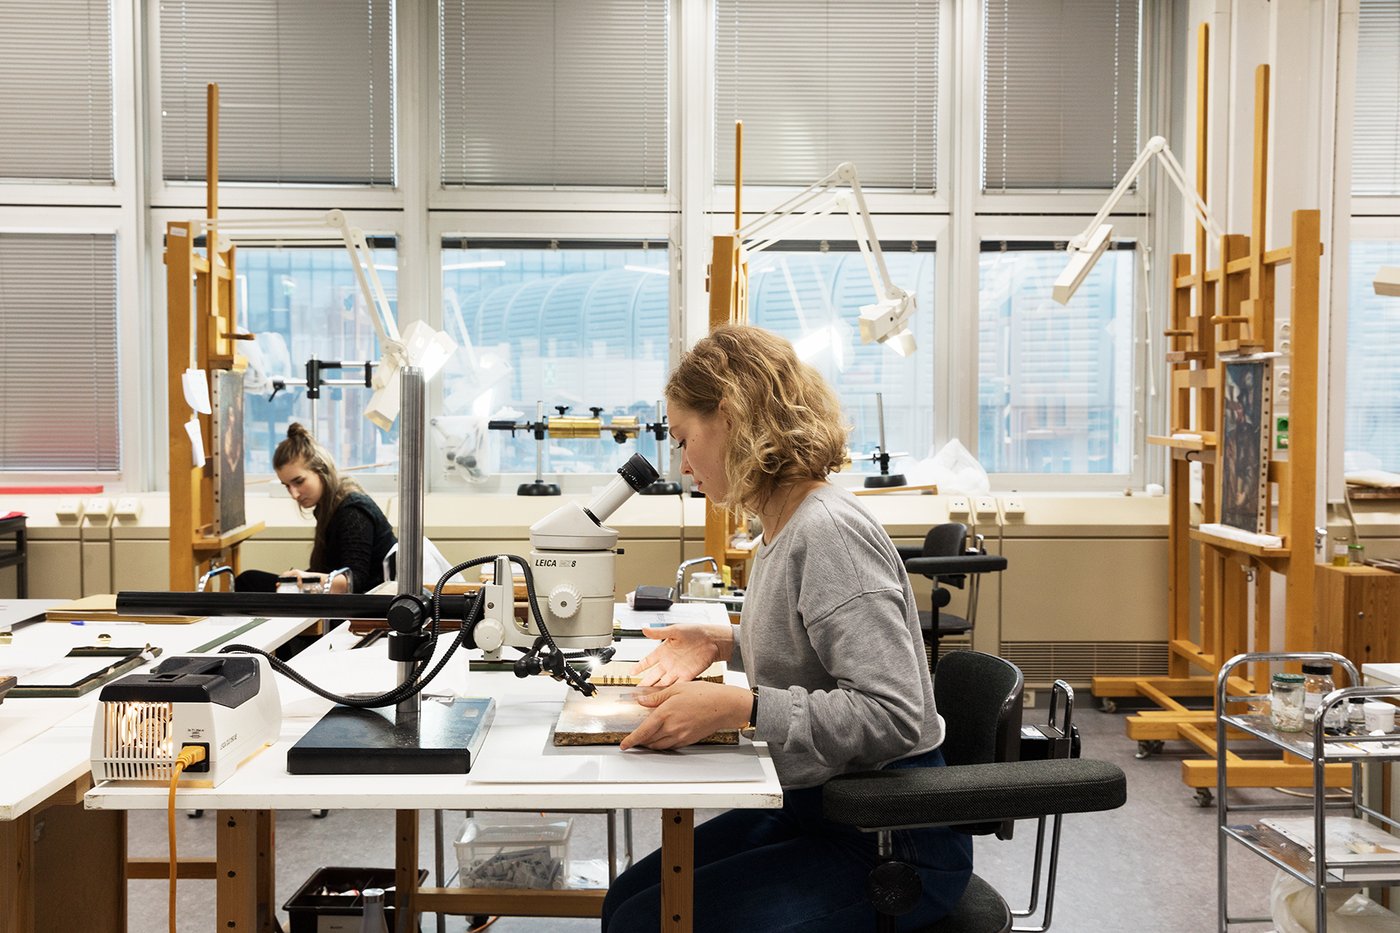 In the center foreground, a student is sitting at a work table; the photo shows her in profile from the left. In front of her is a small painting that she is sliding under a microscope. In the background on the left is a student in front of a painting on an easel, behind her the window front; on the right of the picture are more easels.